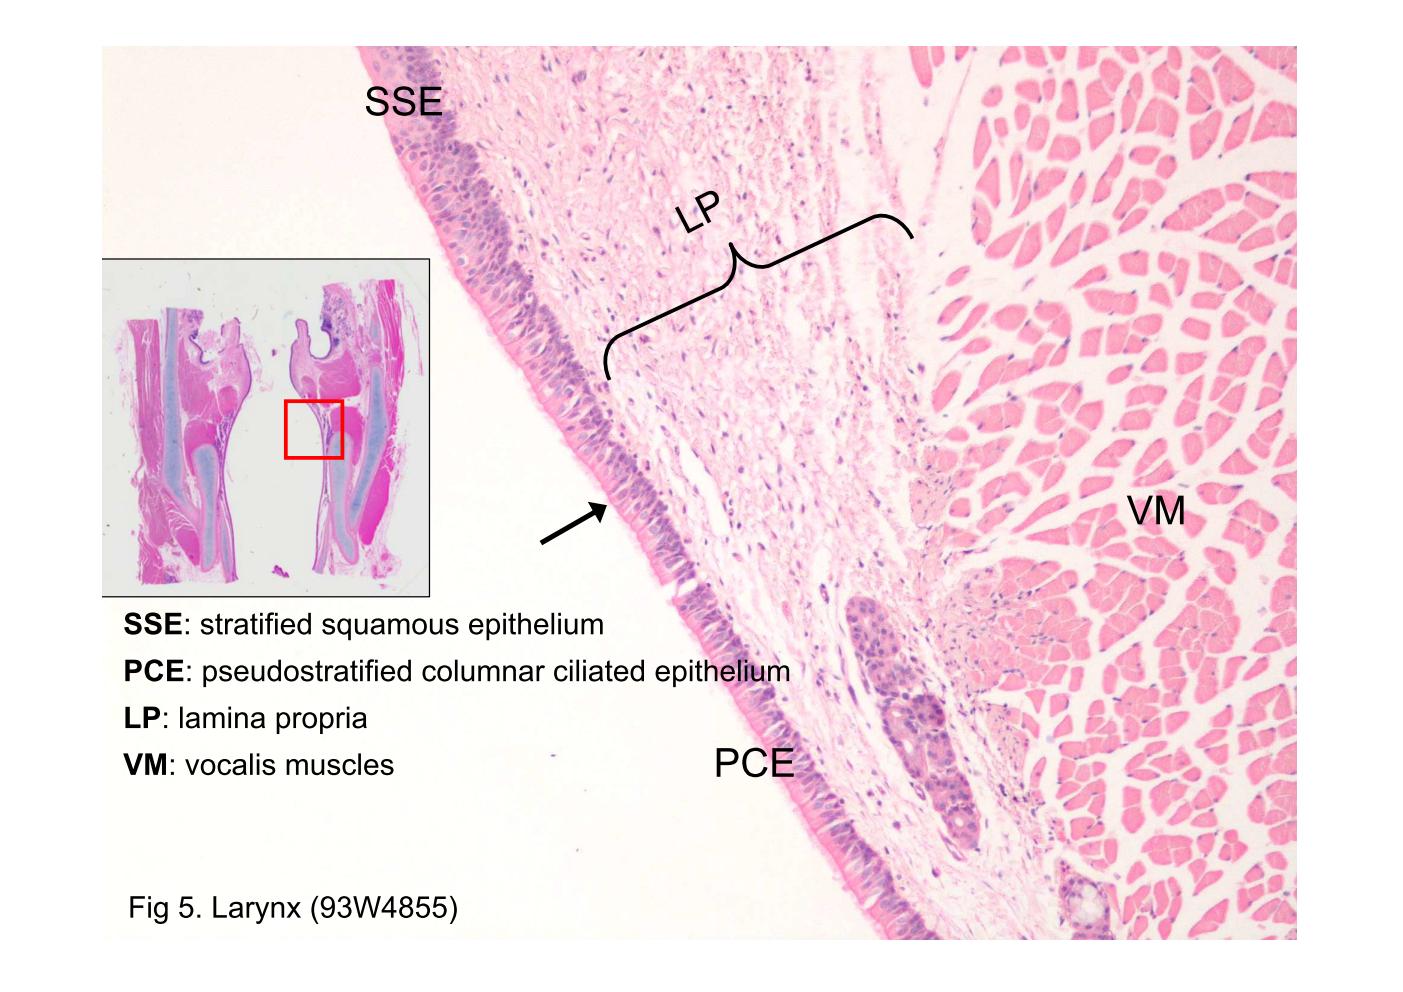 block9_13.jpg - Fig 5. Larynx (93W4855)It shows the lateral surfaces and lower part of the vocal fold. The arrow shows an interface between the stratified squamous epithelium (SSE), with its flat surface cells, and the pseudostratified columnar ciliated epithelium (PCE), with its columnar surface cells, is present. The lamina propria (LP) consists of loose connective tissue. Adjacent to the lamina propria the vocalis muscles (VM) can be observed.